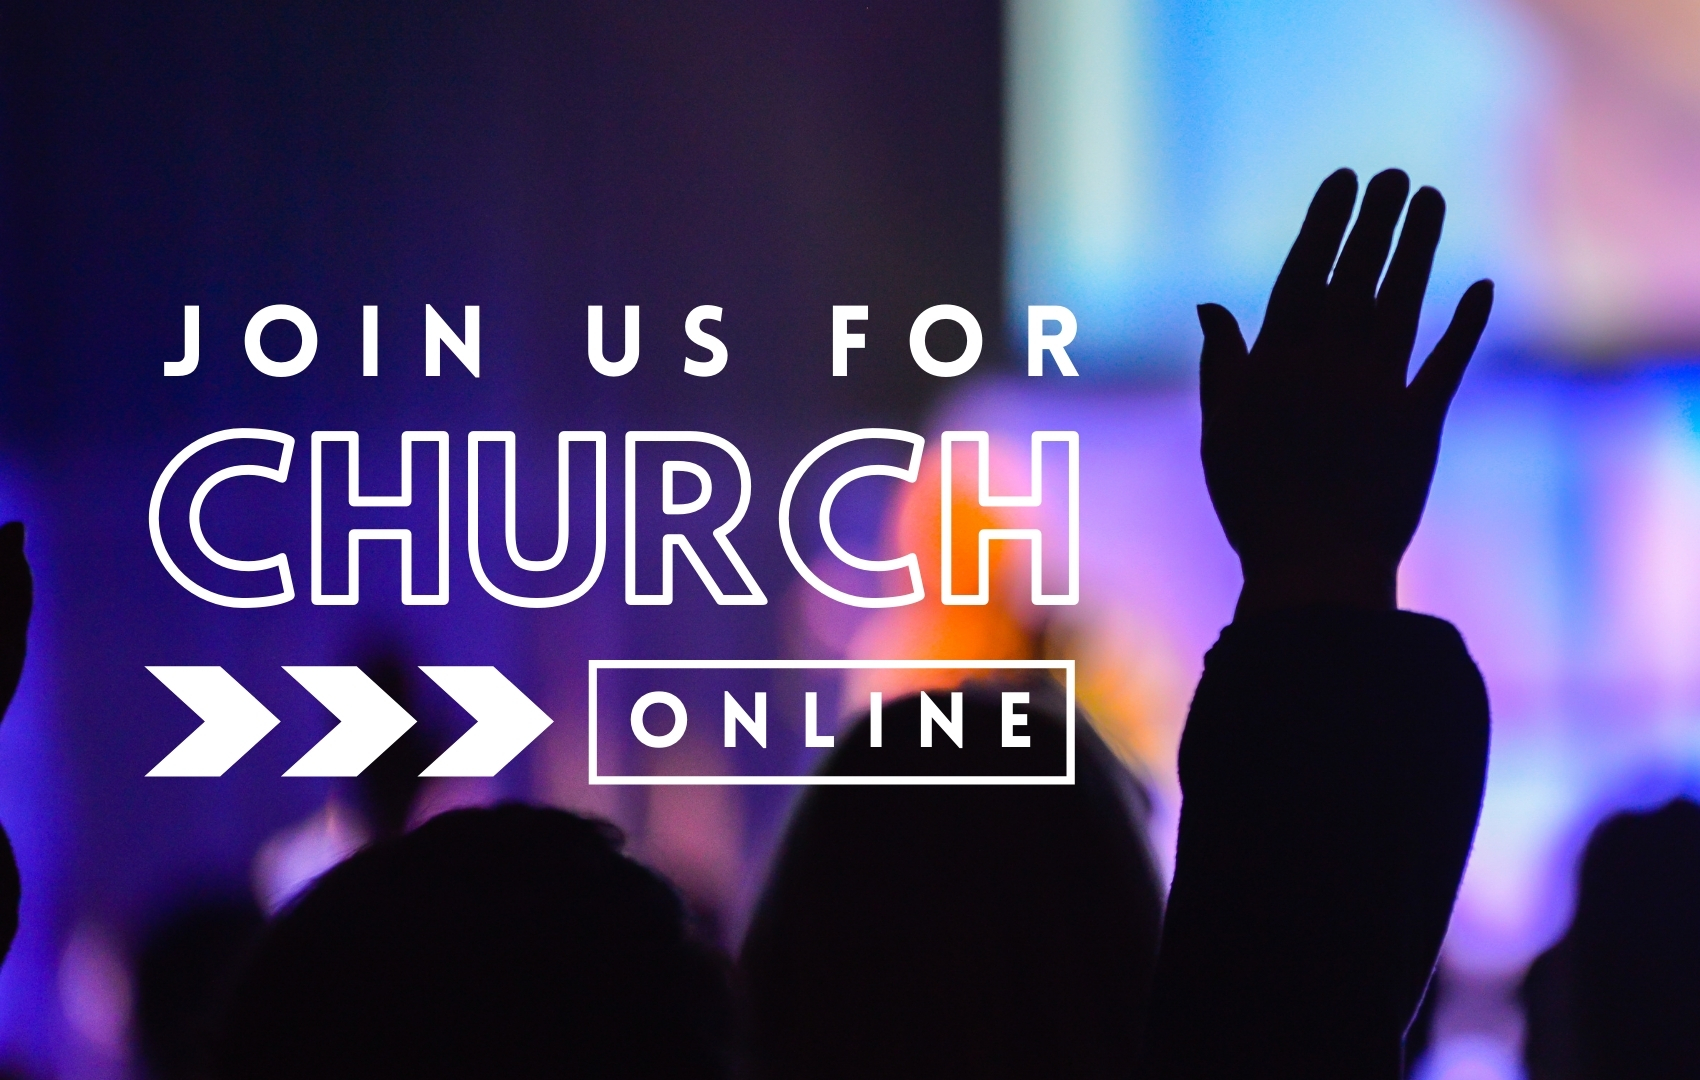 Join us for Church Online - click here